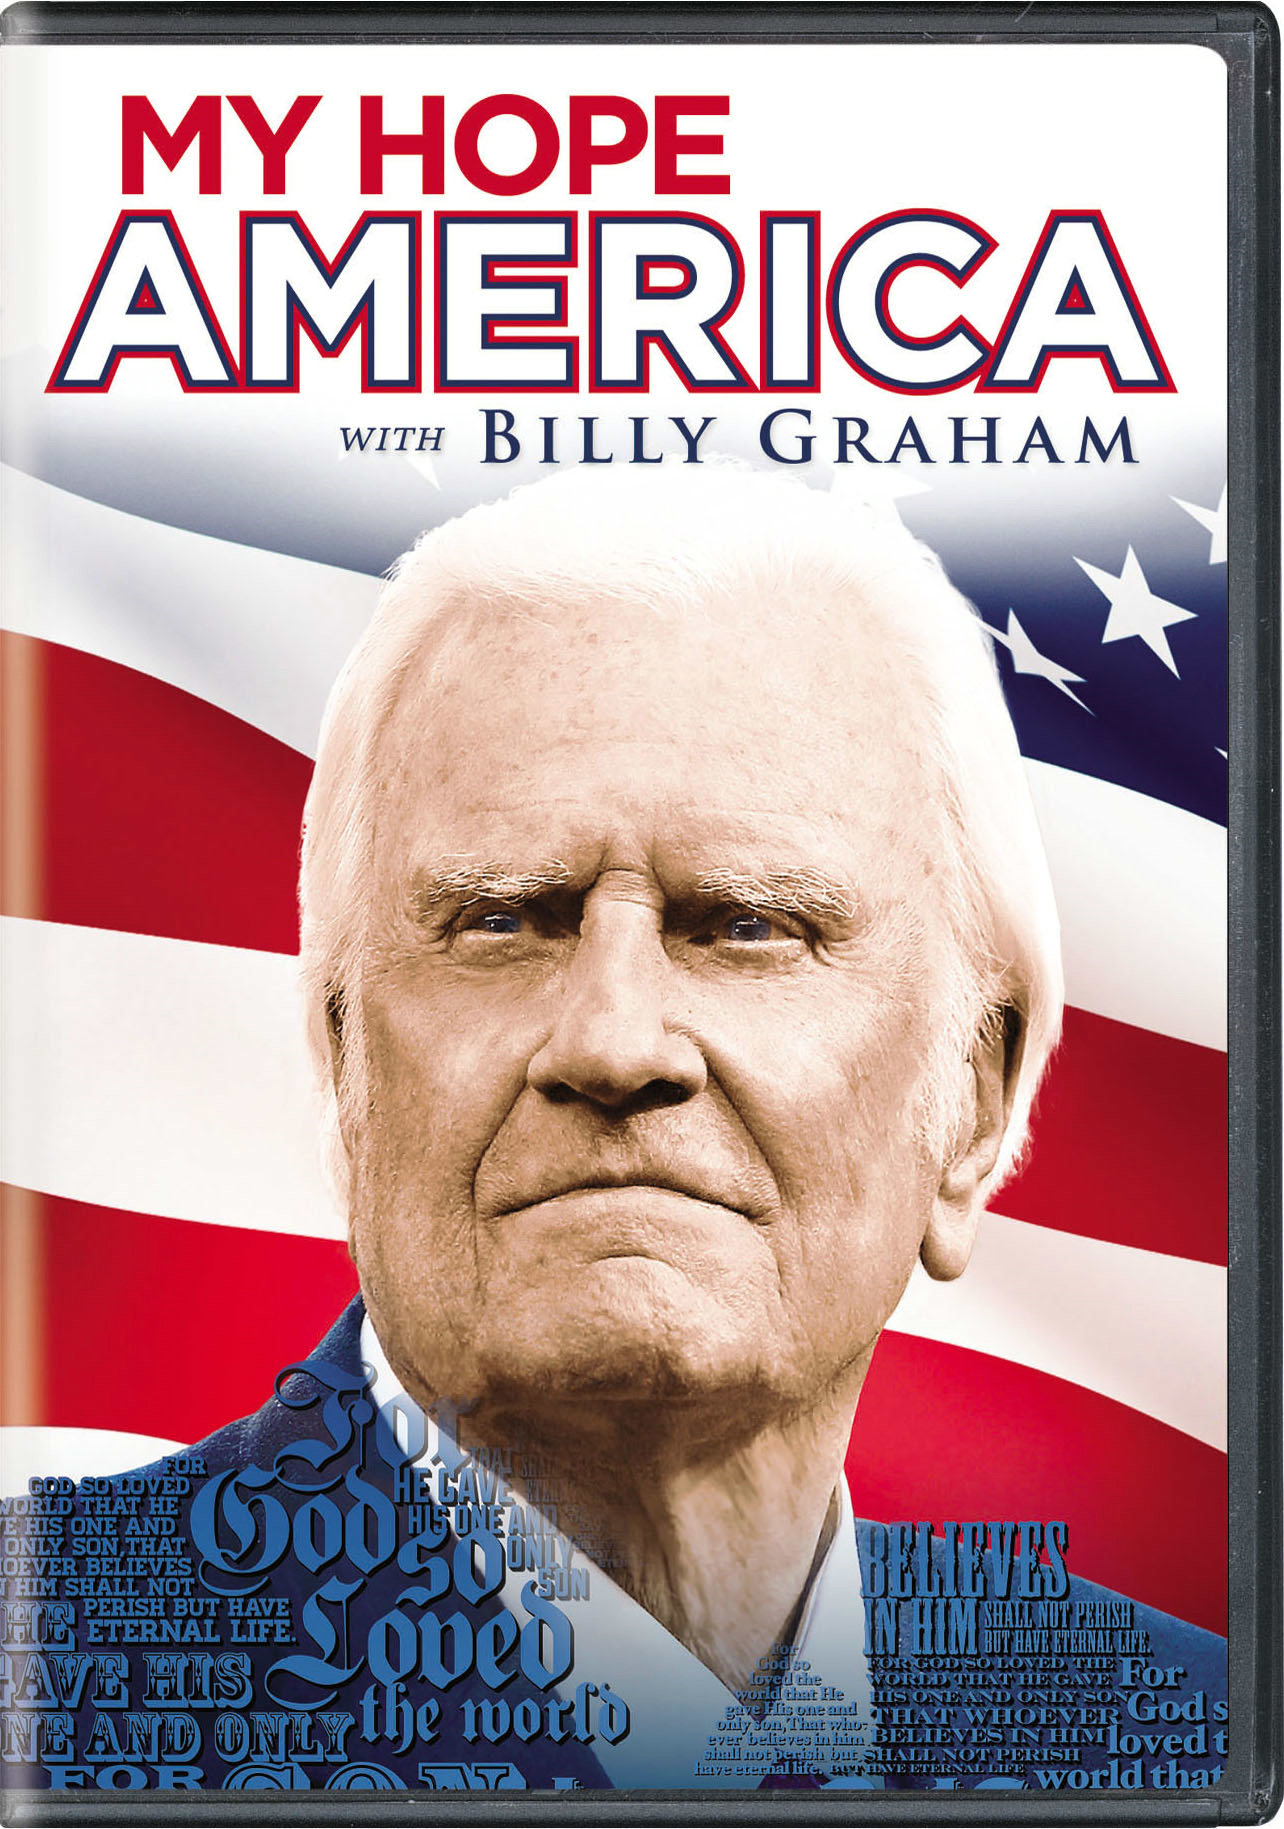 My Hope America With Billy Graham - DVD [ 2013 ]  - Documentaries On DVD